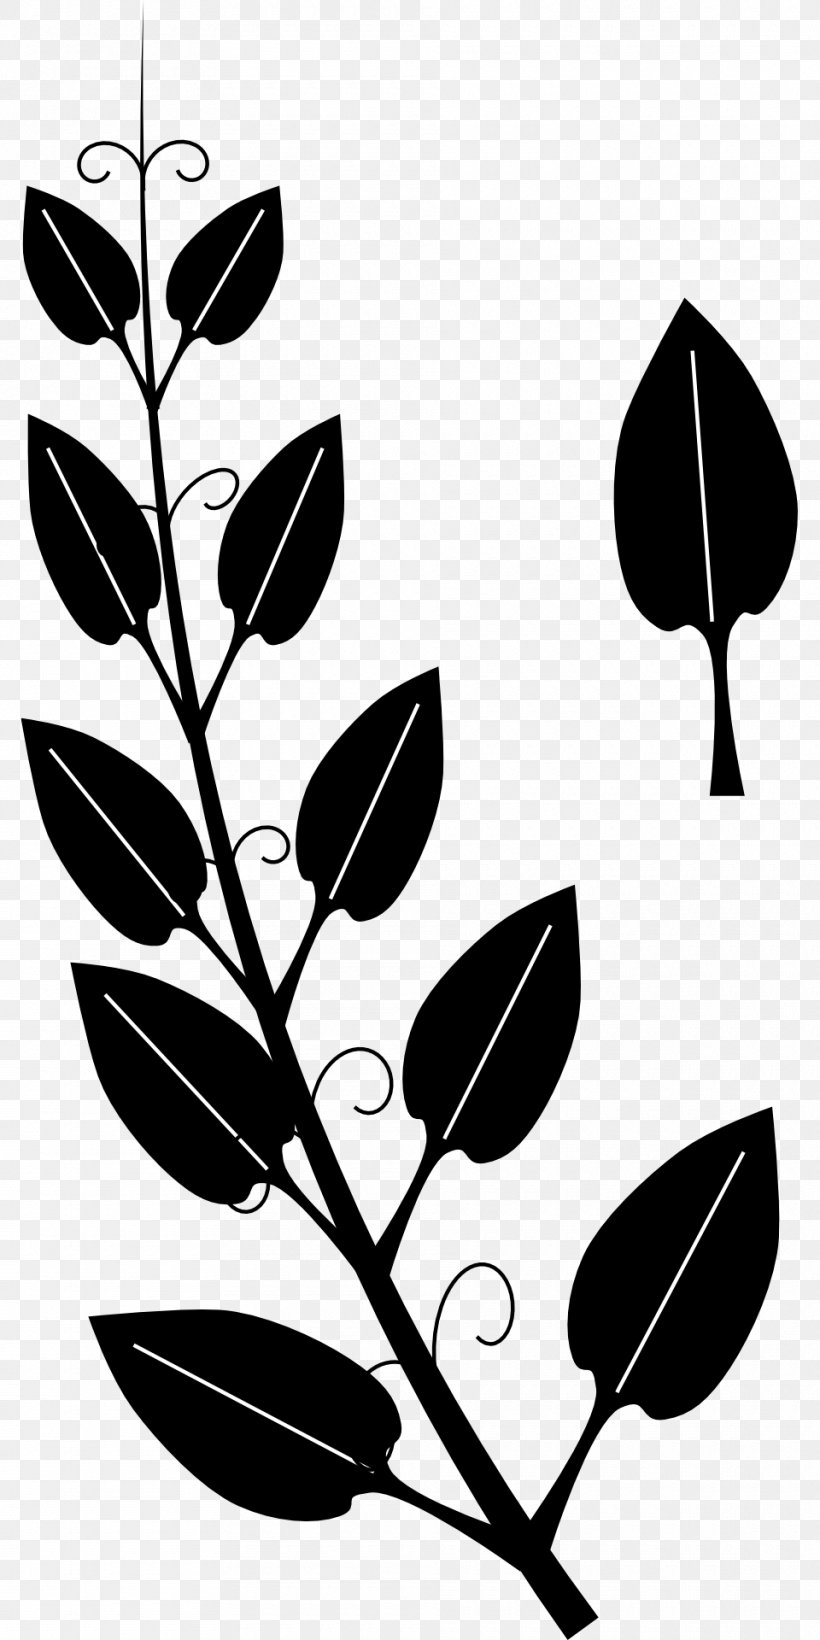 Vine Tendril Drawing Ivy Clip Art, PNG, 960x1920px, Vine, Black, Black And White, Branch, Drawing Download Free